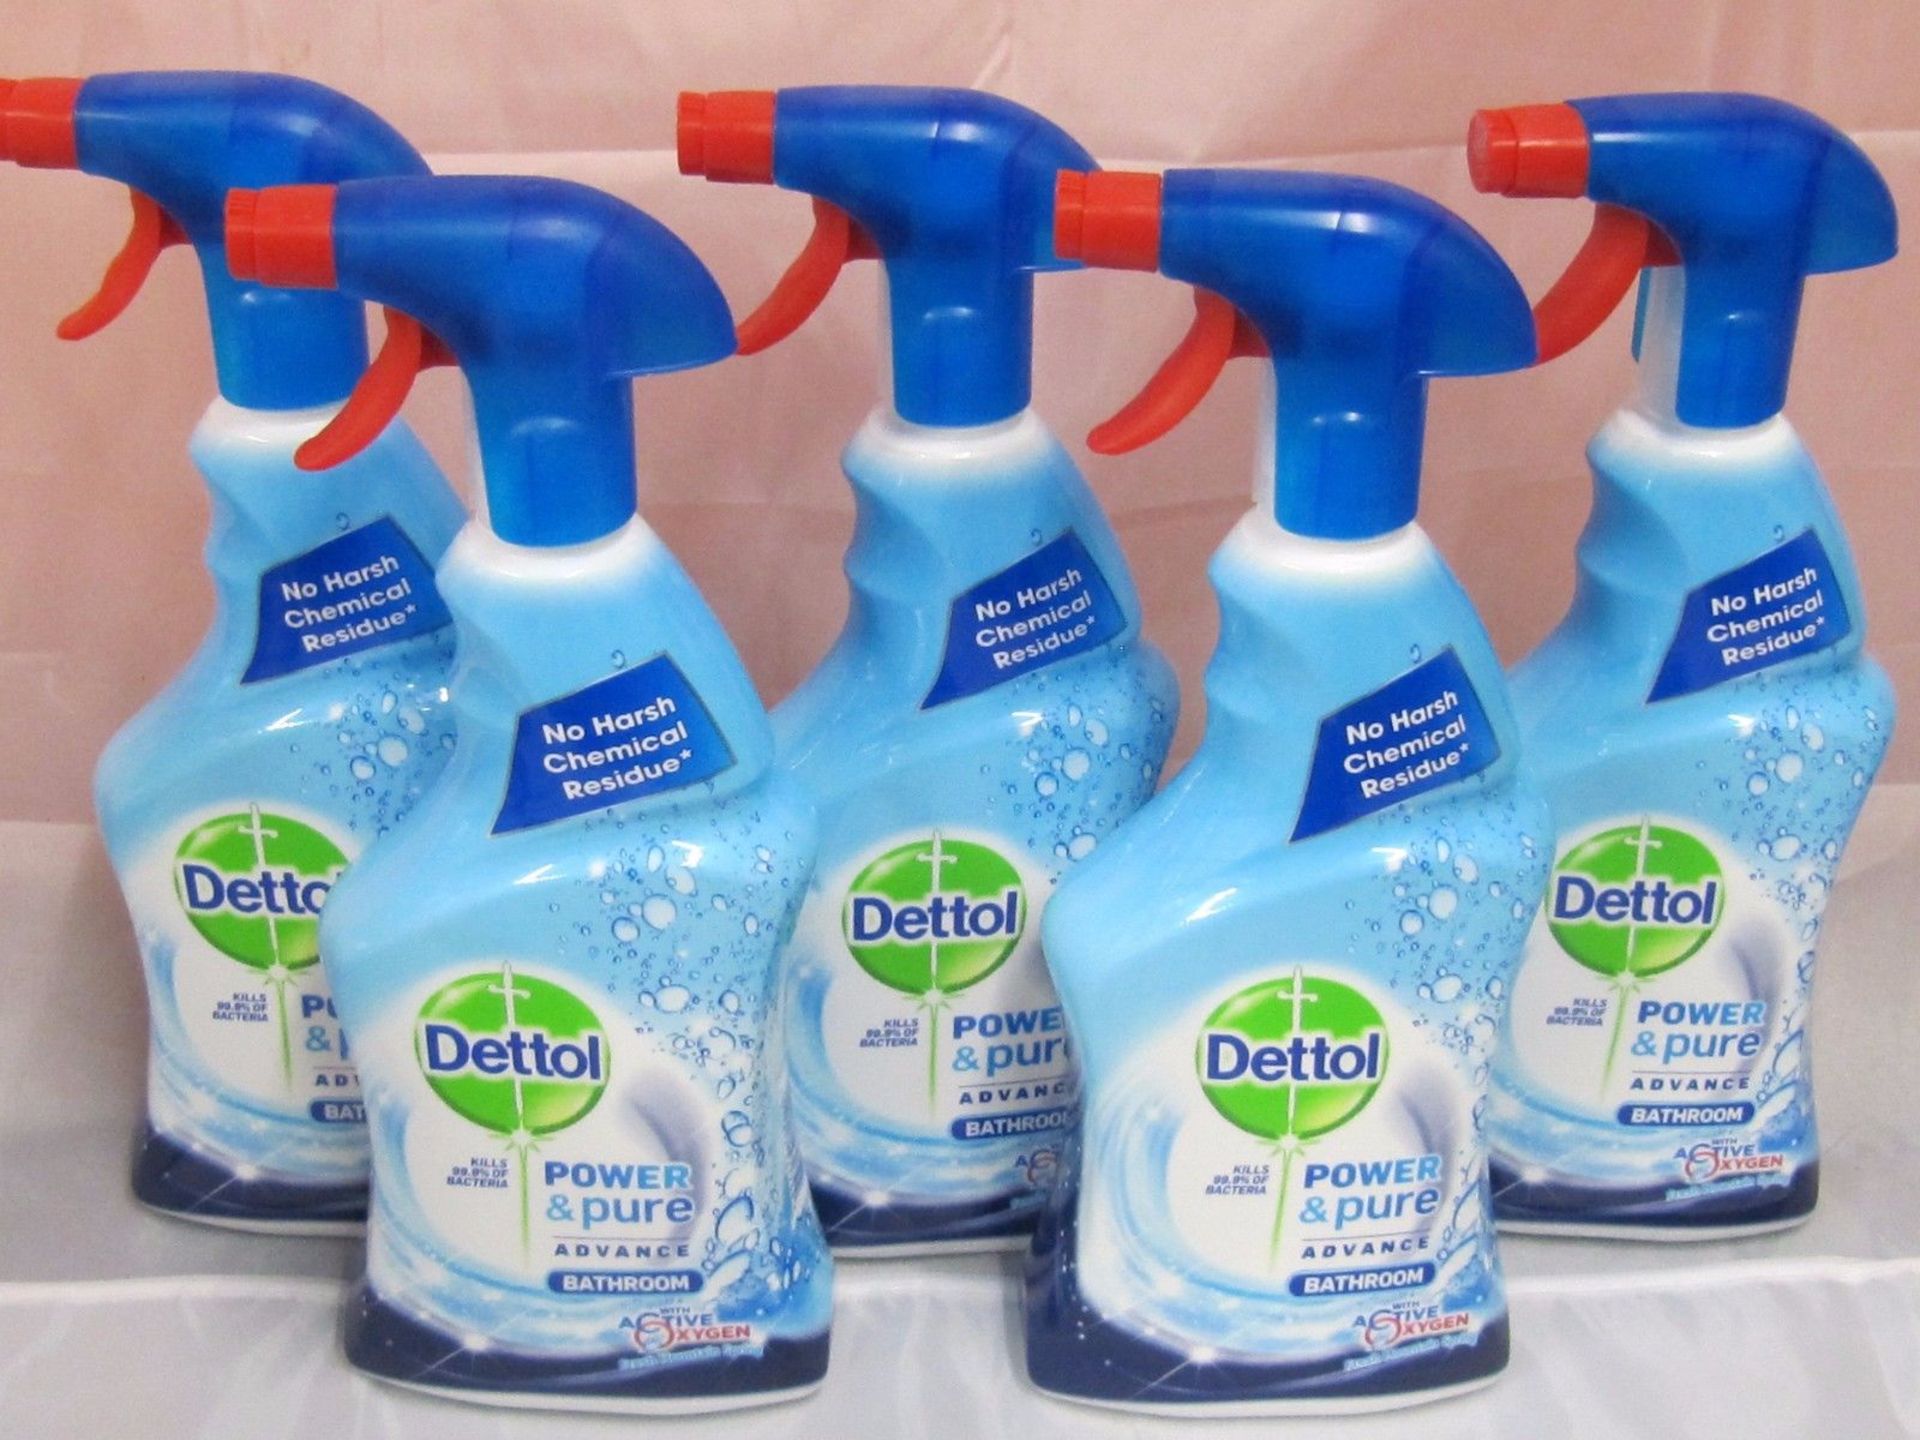 5 x Dettol Power & Pure Advance Bathroom Cleaner 750ml - Image 4 of 6